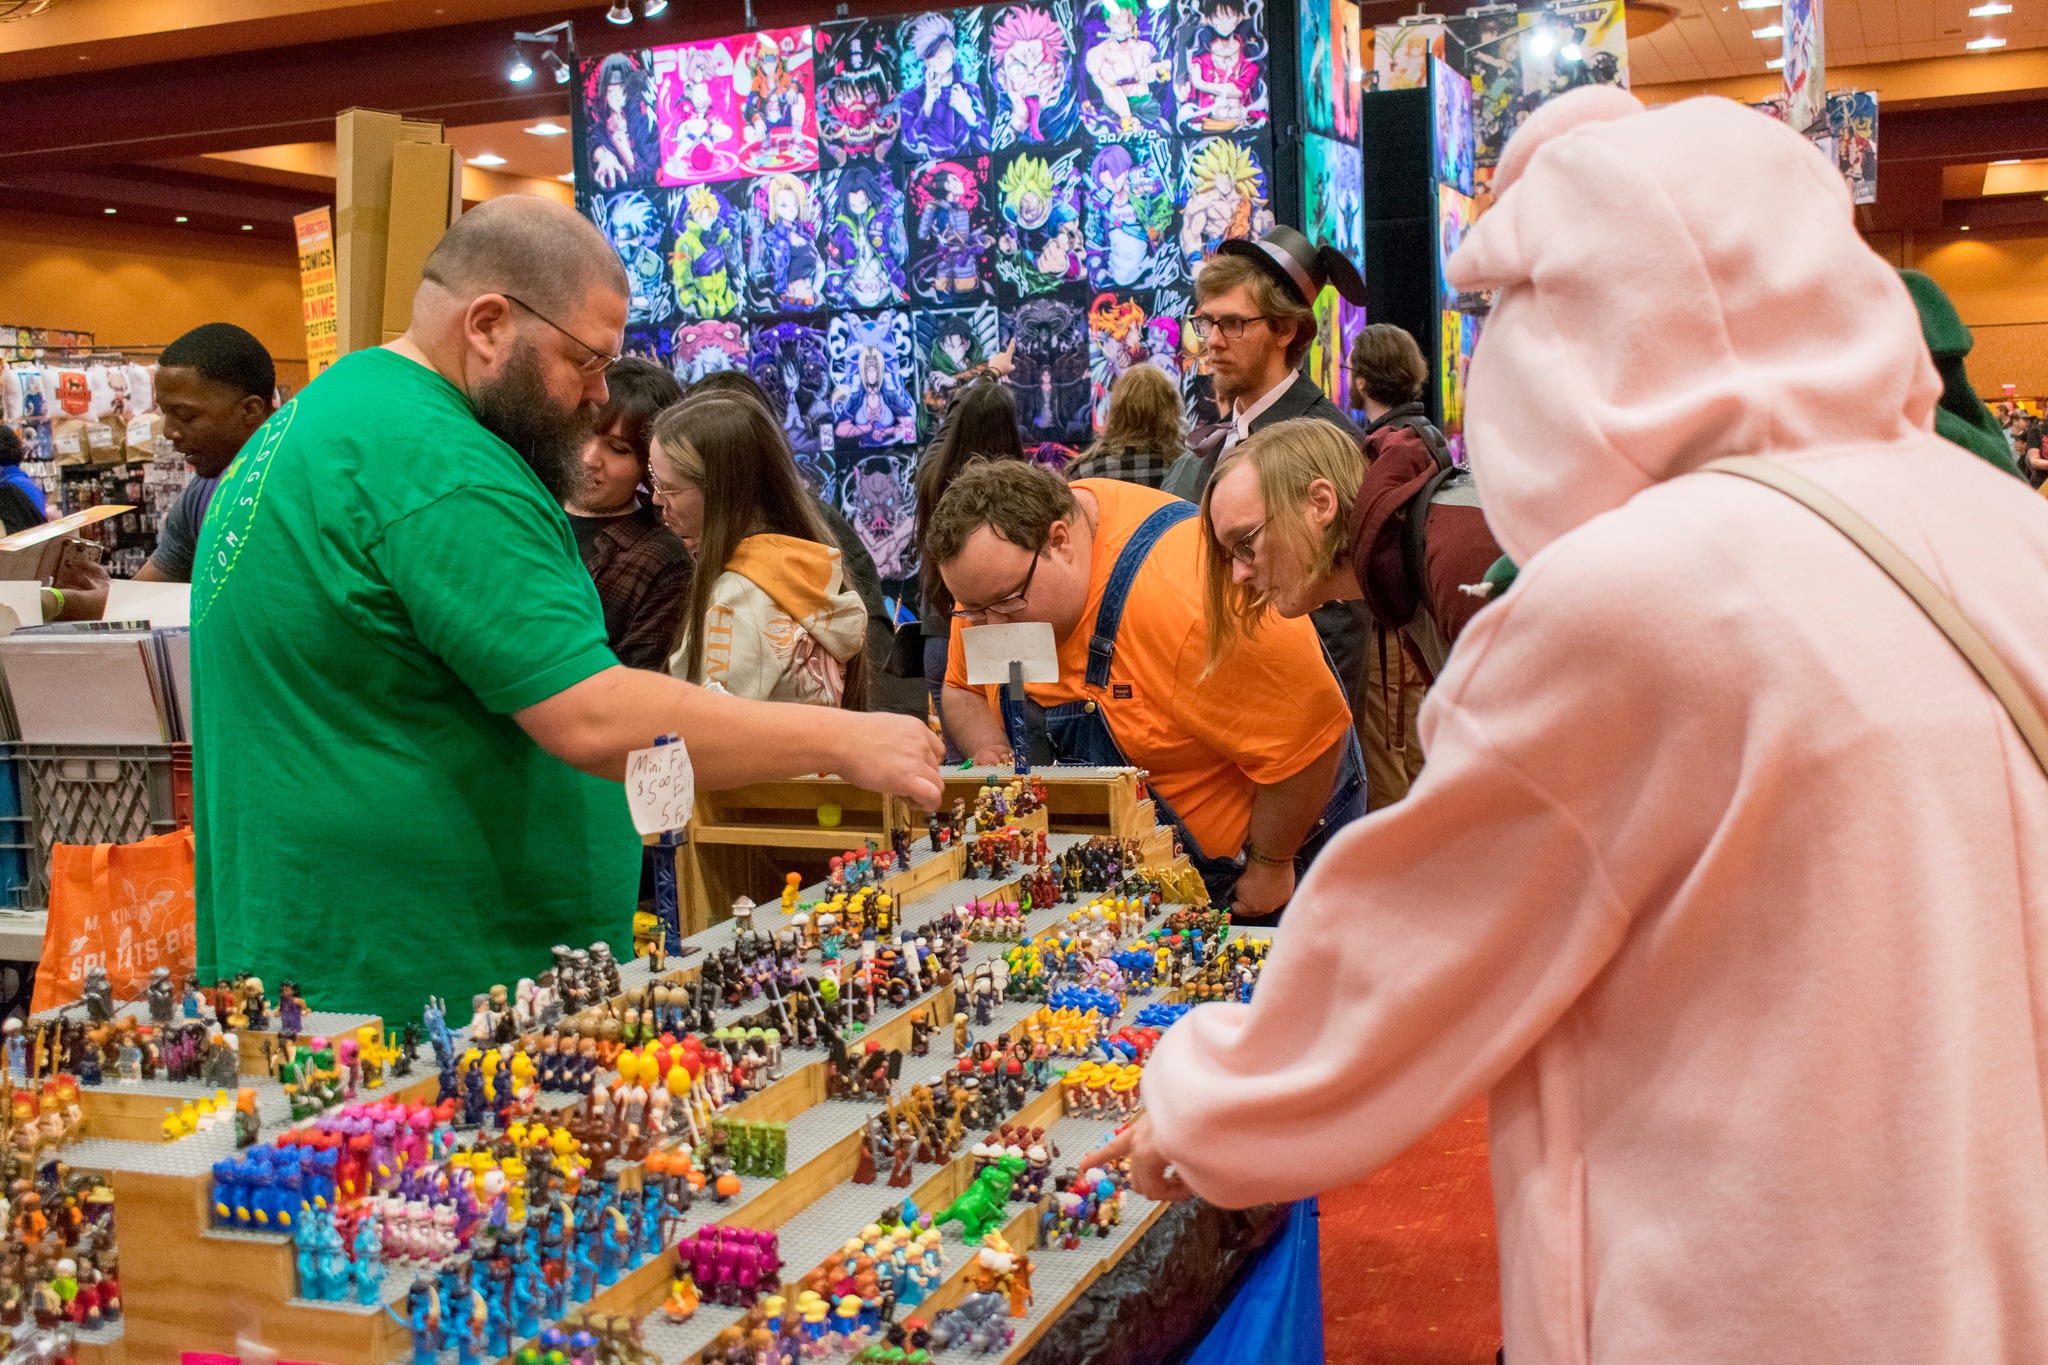 People browse a table filled with mini figurines